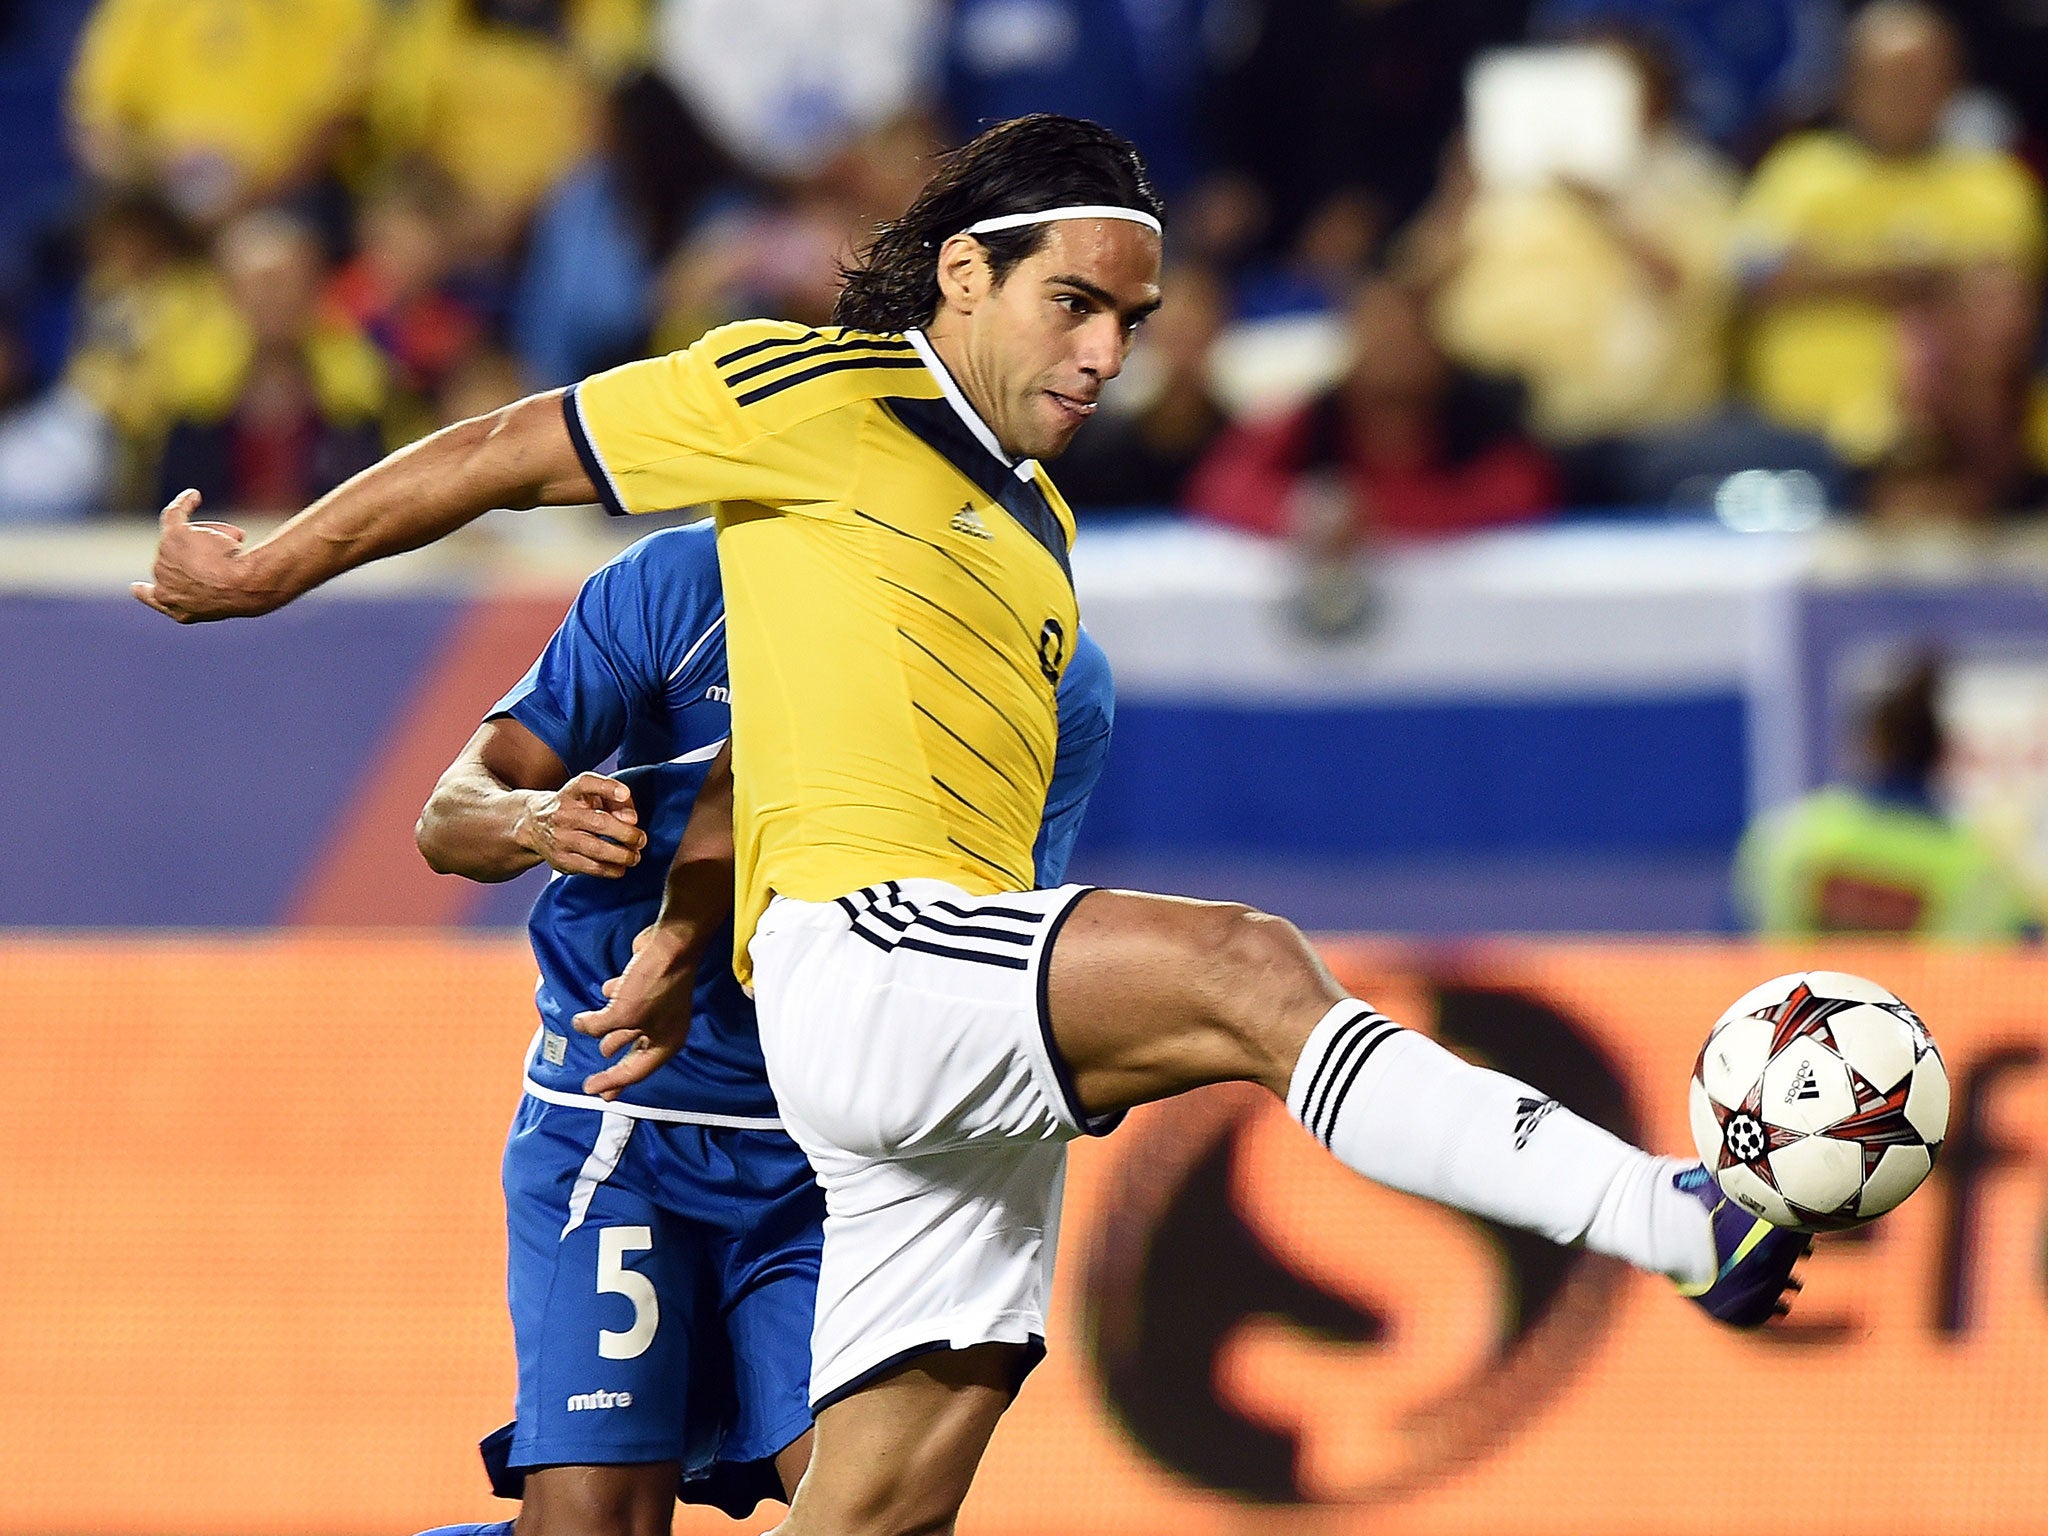 Radamel Falcao in action for Colombia